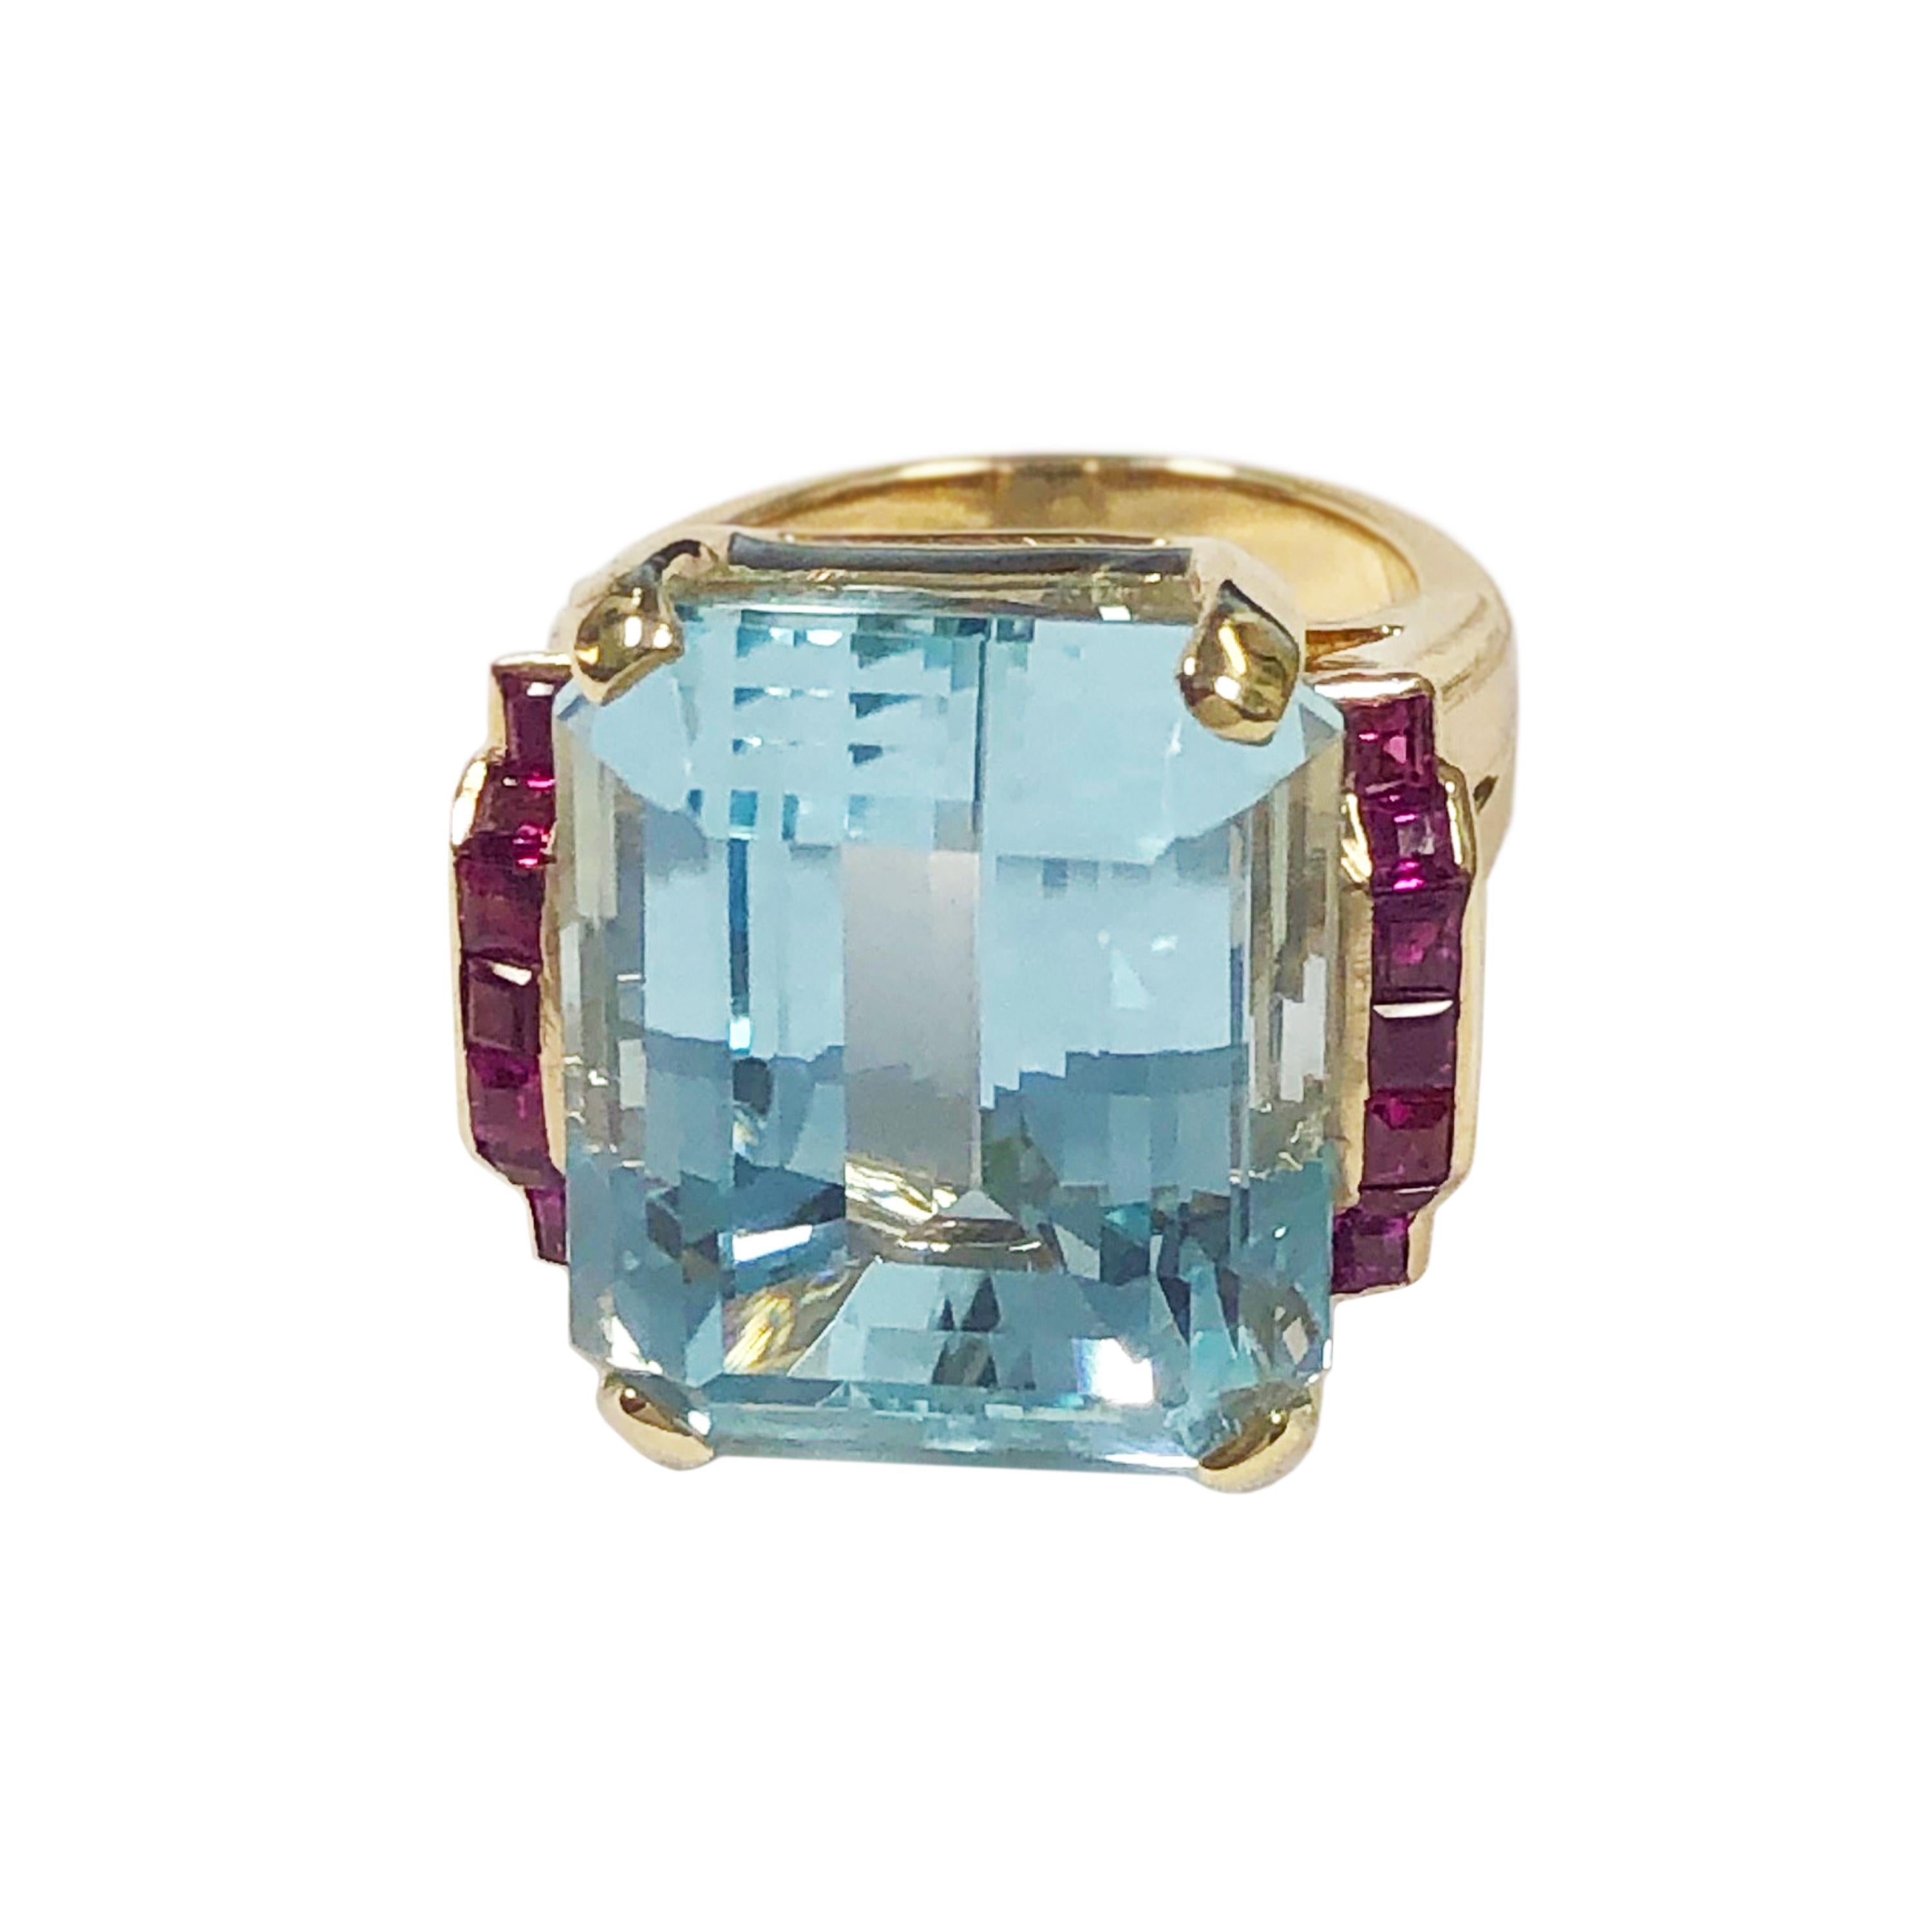 Circa 1940s Retro Aquamarine Ring, 14K Rose Gold and set with a very Fine bright Ocean Blue Step cut Aquamarine measuring 19 X 15 M.M. approximately 14 Carats. Set on either side with Fine color Square step cut Rubies. Finger size 7. Excellent,